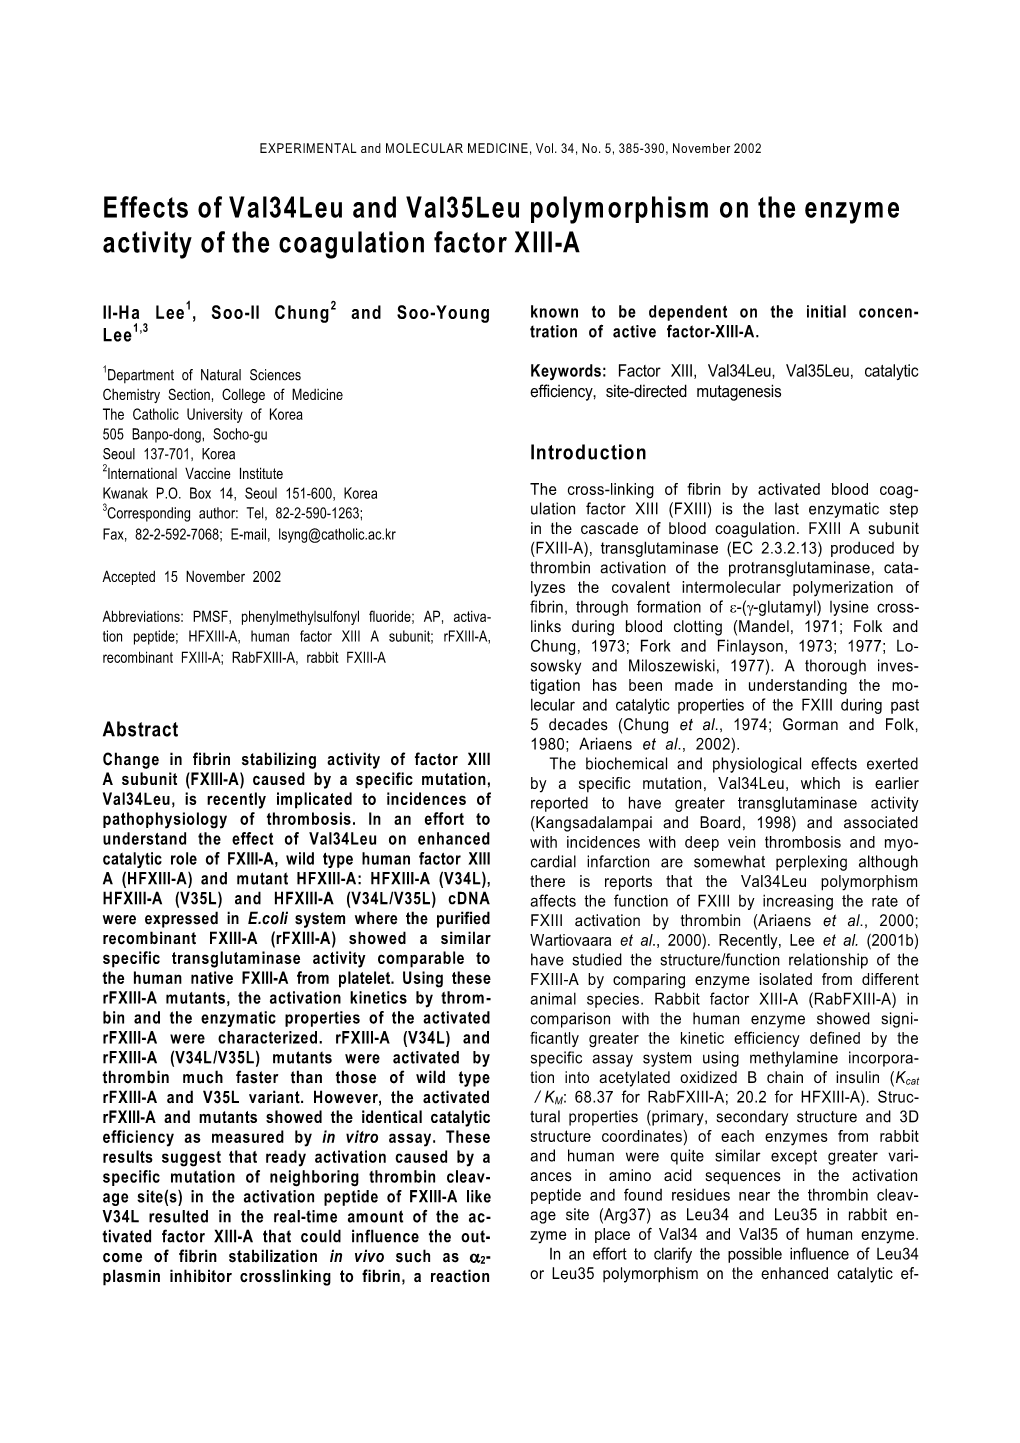 Effects of Val34leu and Val35leu Polymorphism on the Enzyme Activity of the Coagulation Factor XIII-A